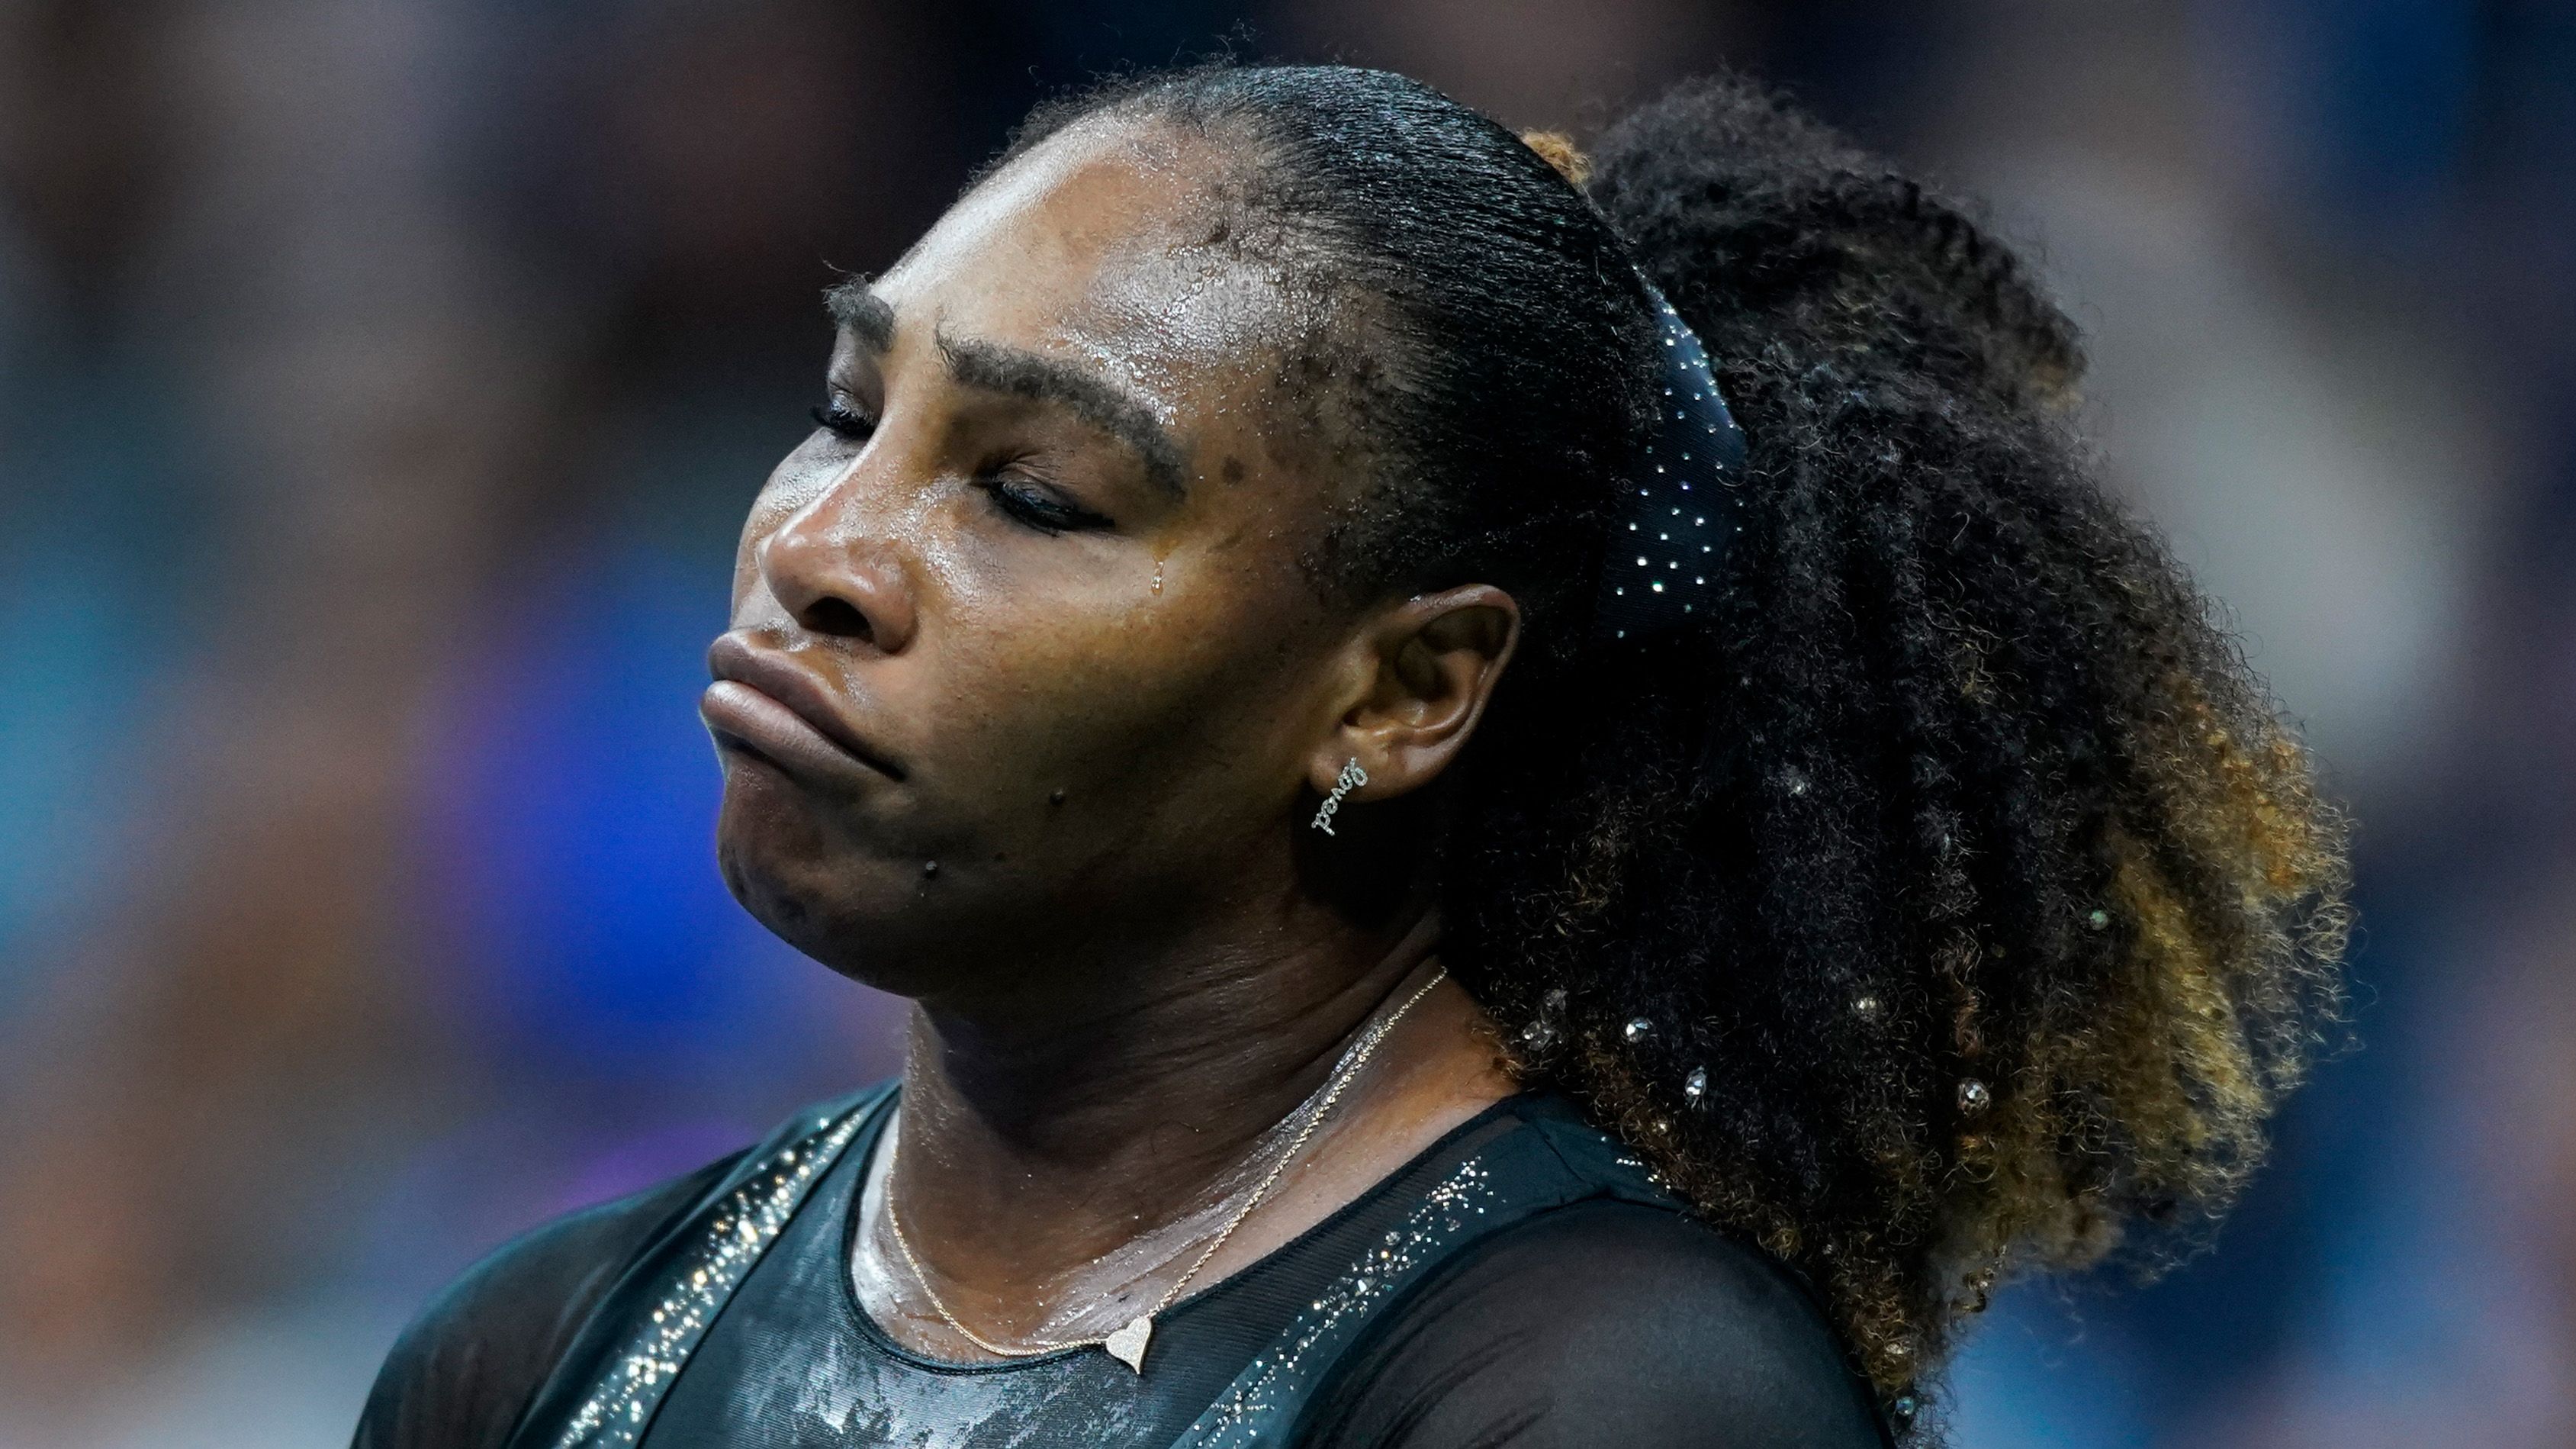 Serena Williams  reacts after losing a point against Ajla Tomlijanovic of Australia during the Women&#x27;s Singles Third  Round match at the USTA Billie Jean King National Tennis Center during the day 5 of the 2022 U.S. Open Tennis Tournament on September 2, 2022. In New York. (Photo by Eduardo MunozAlvarez/VIEWpress)